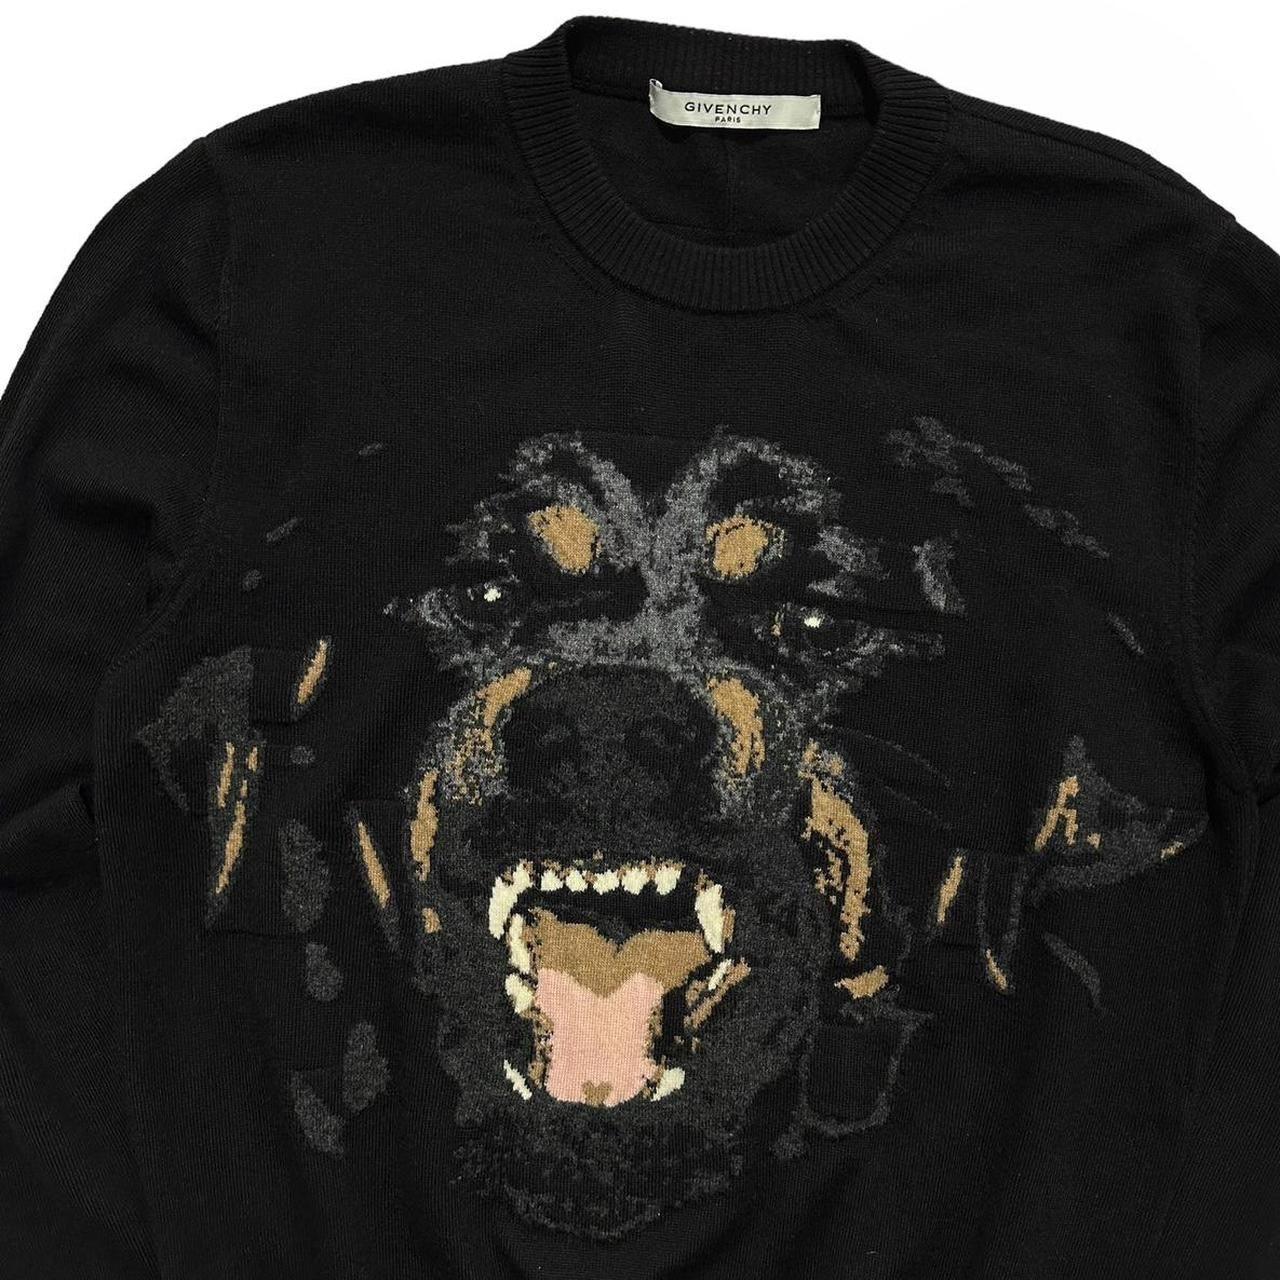 Givency Rottweiler Black Knit Jumper - Known Source